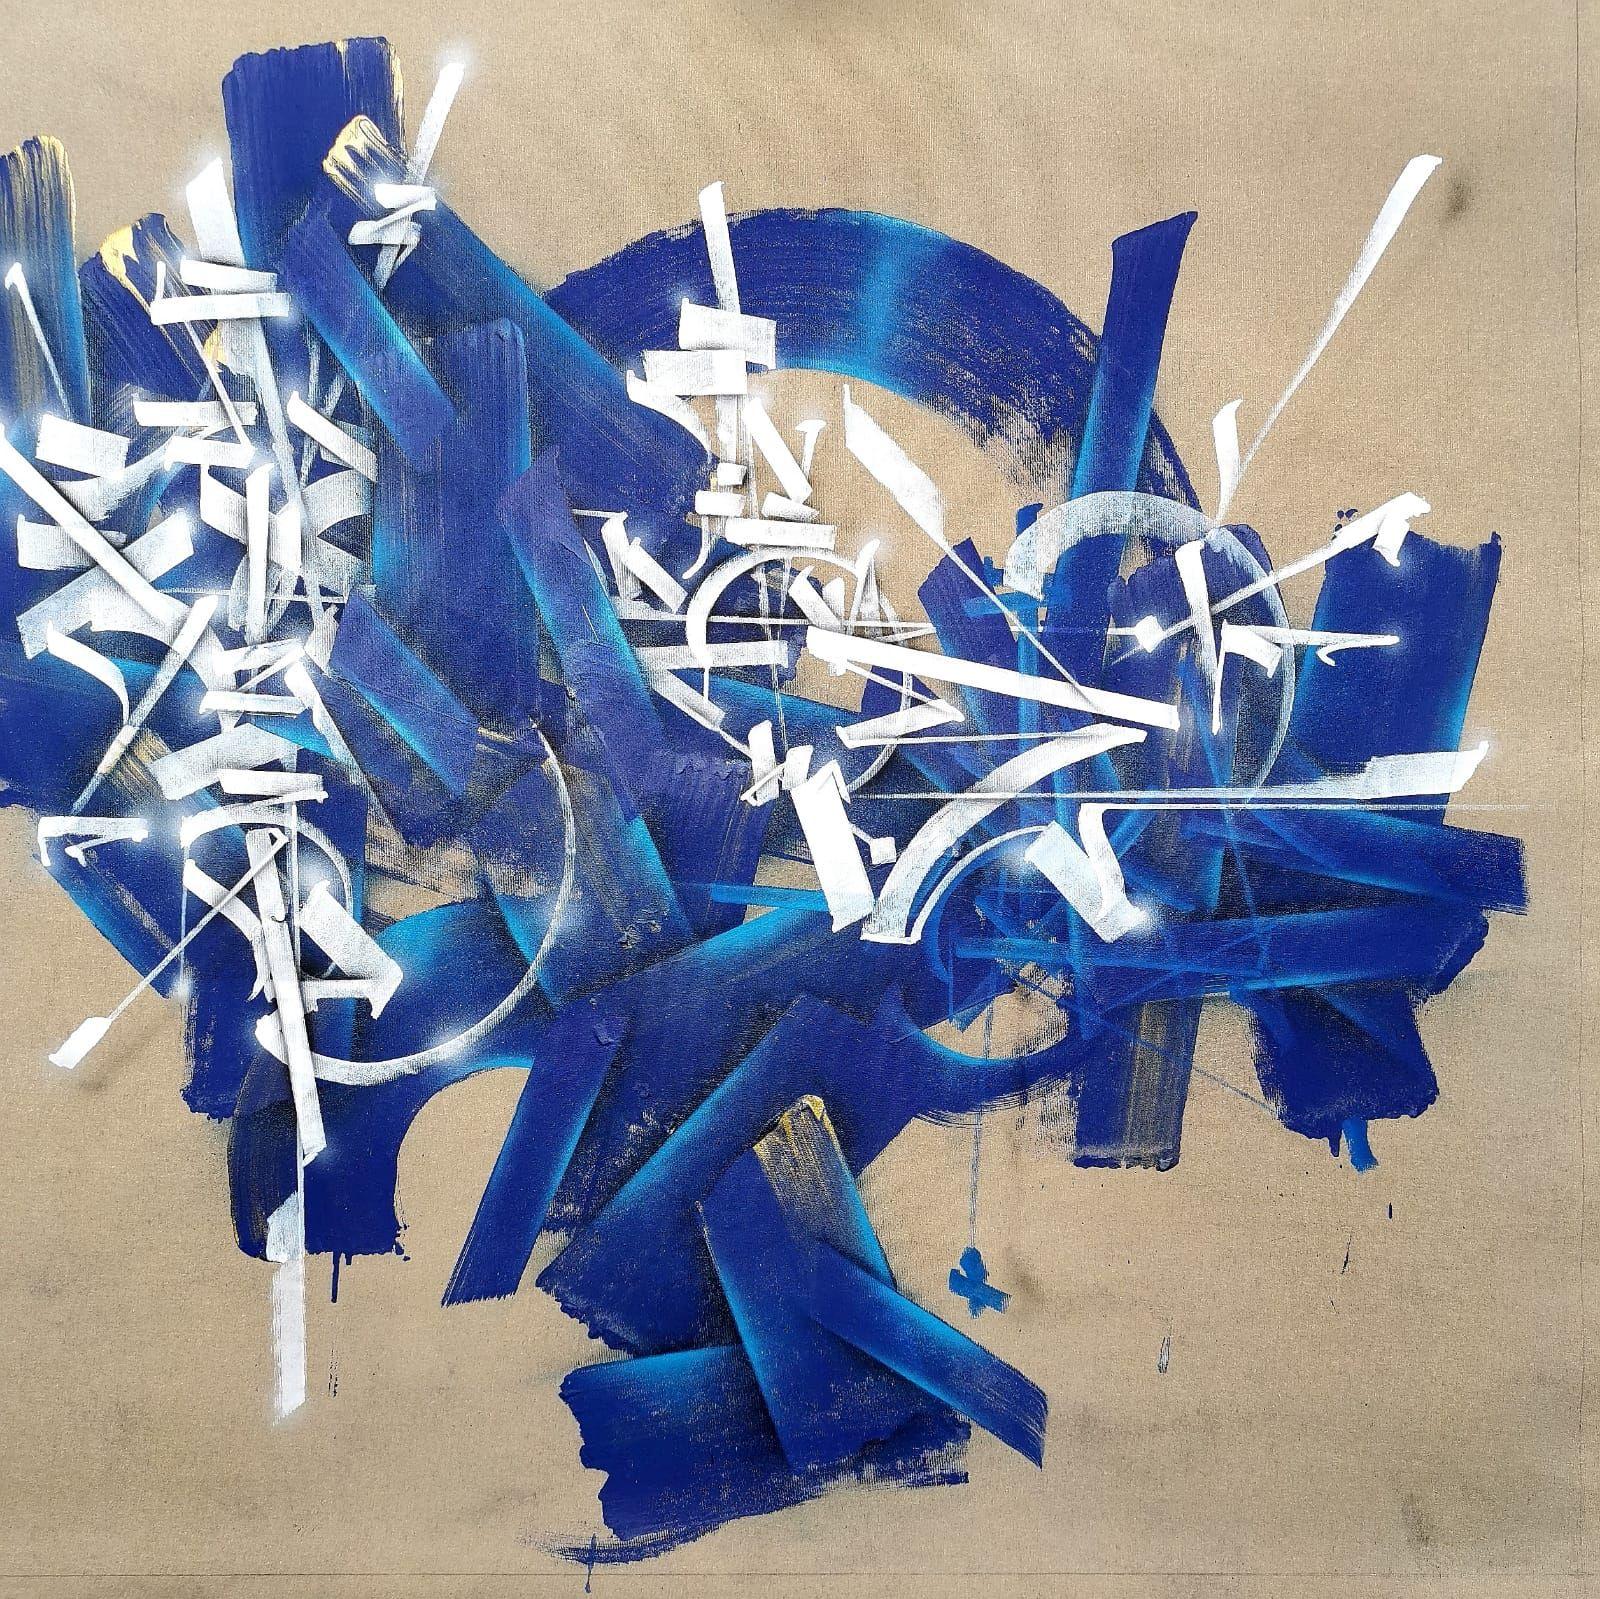 DMVT 2904, Abtract and Calligraphic Art By French Street Artist SOKLAK